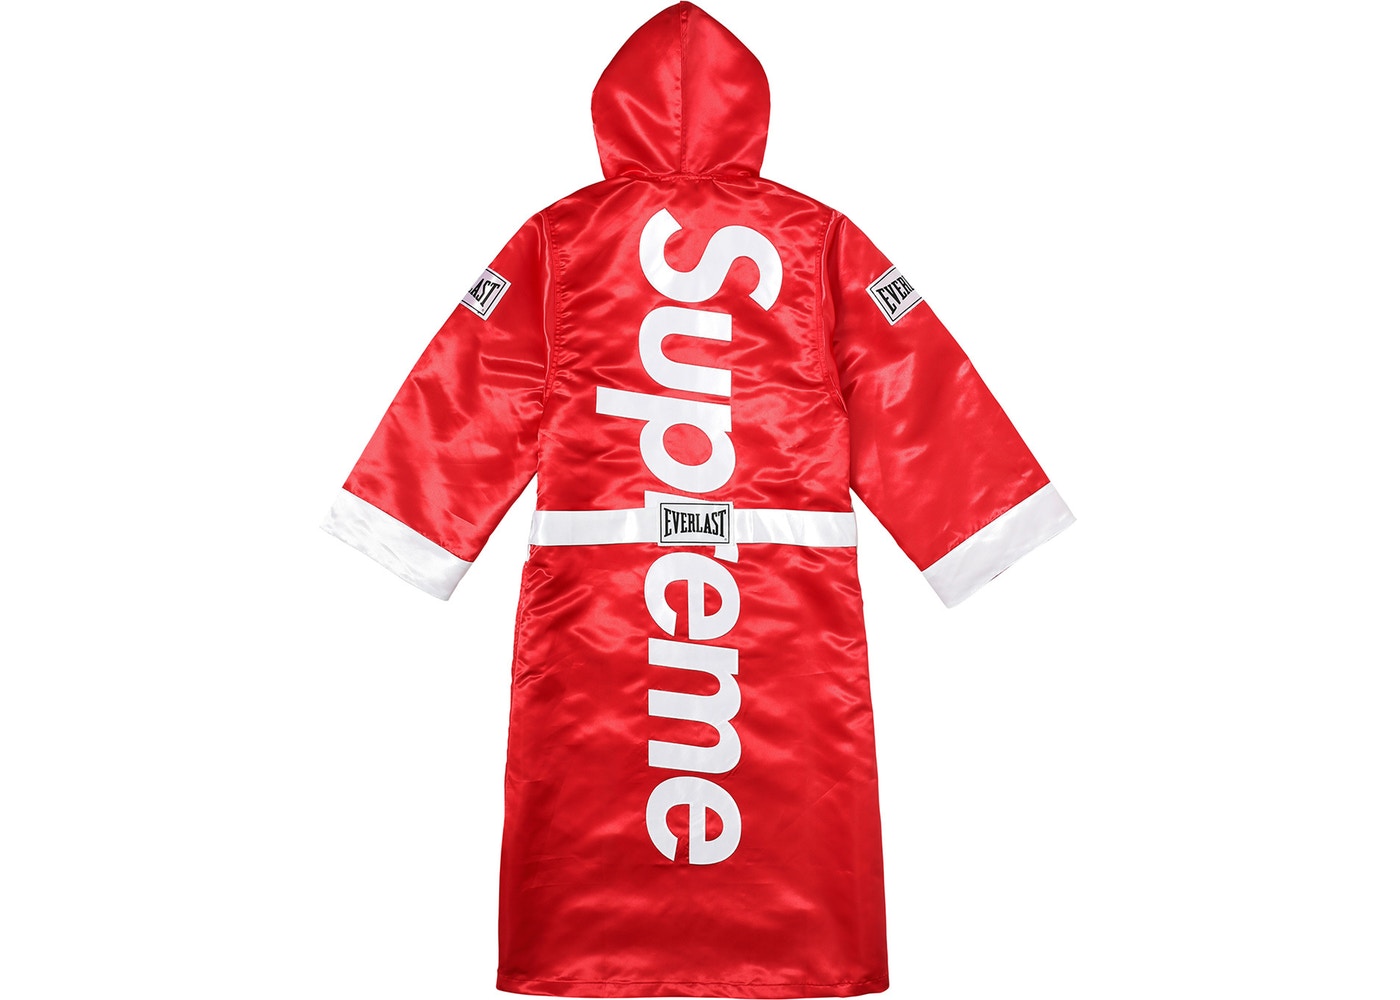 Supreme Everlast Satin Hooded Boxing Robe Red